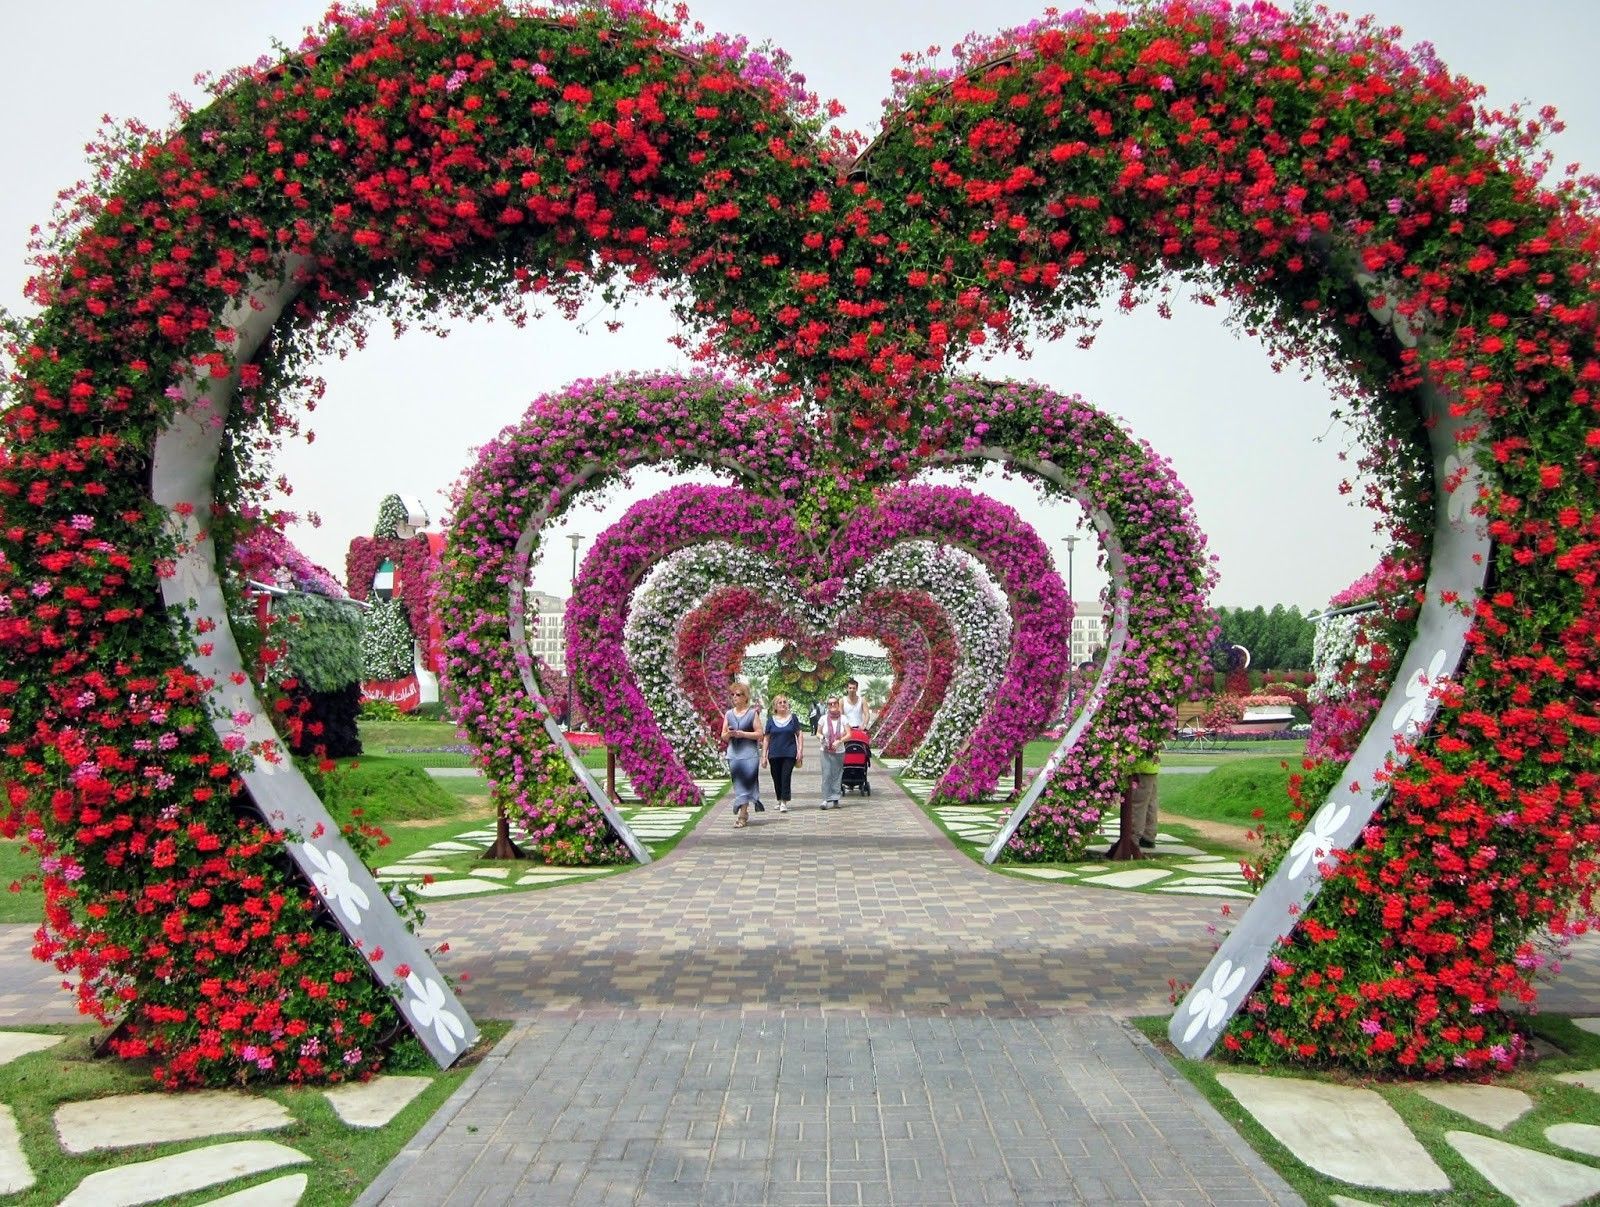 Red and pink flower tunnel in the form of hearts. Flowers